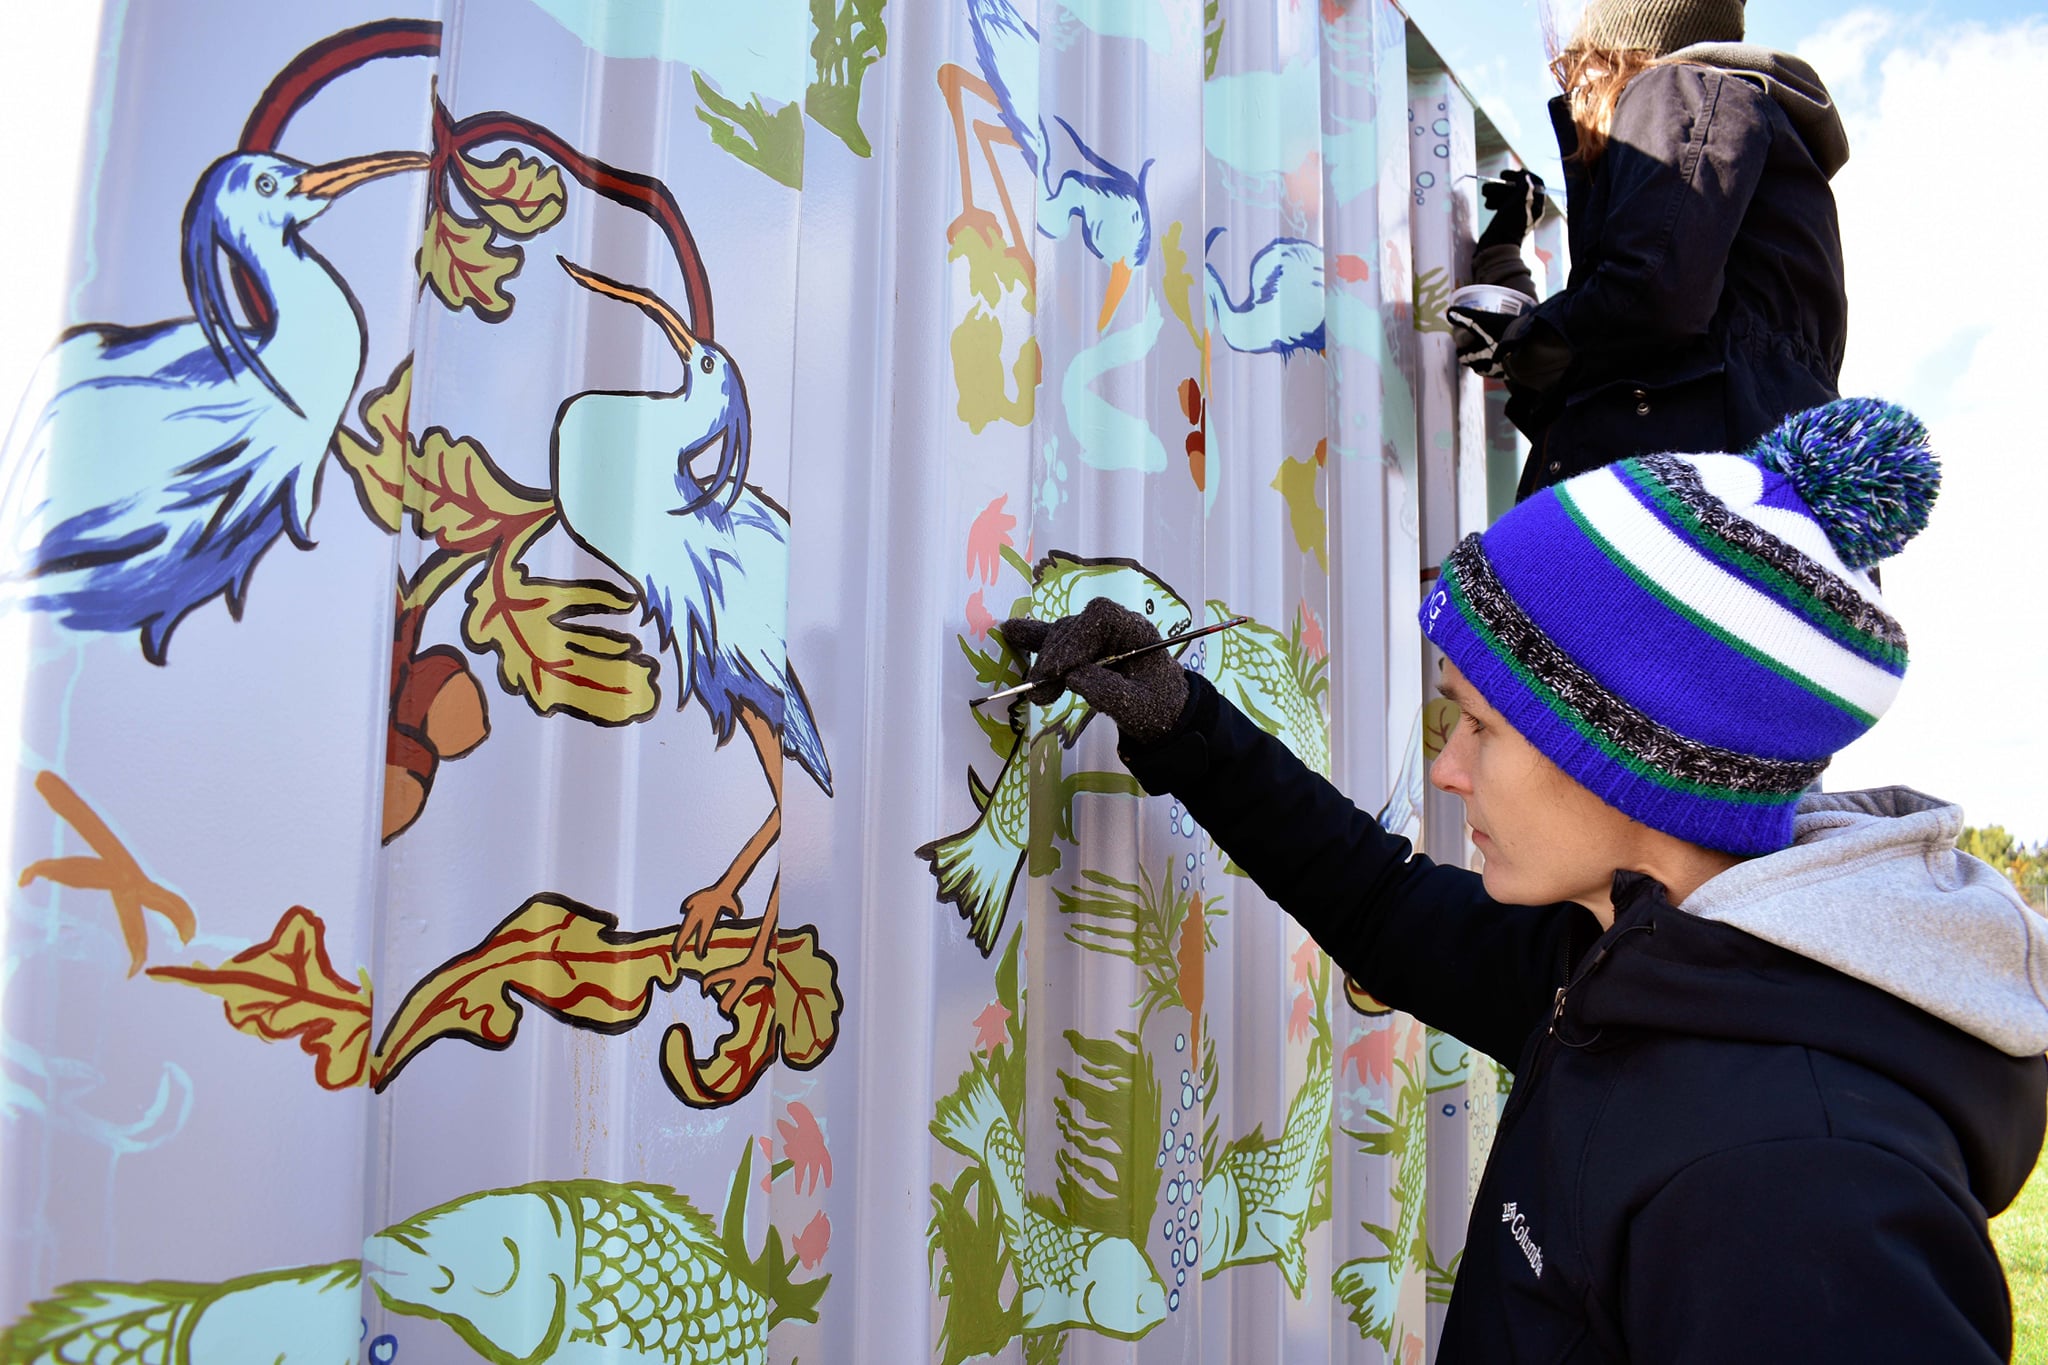 artist Laura Peturson, wearing a black coat, gloves and blue striped toque, painting a beautiful bird and floral motif on an outdoor wall.